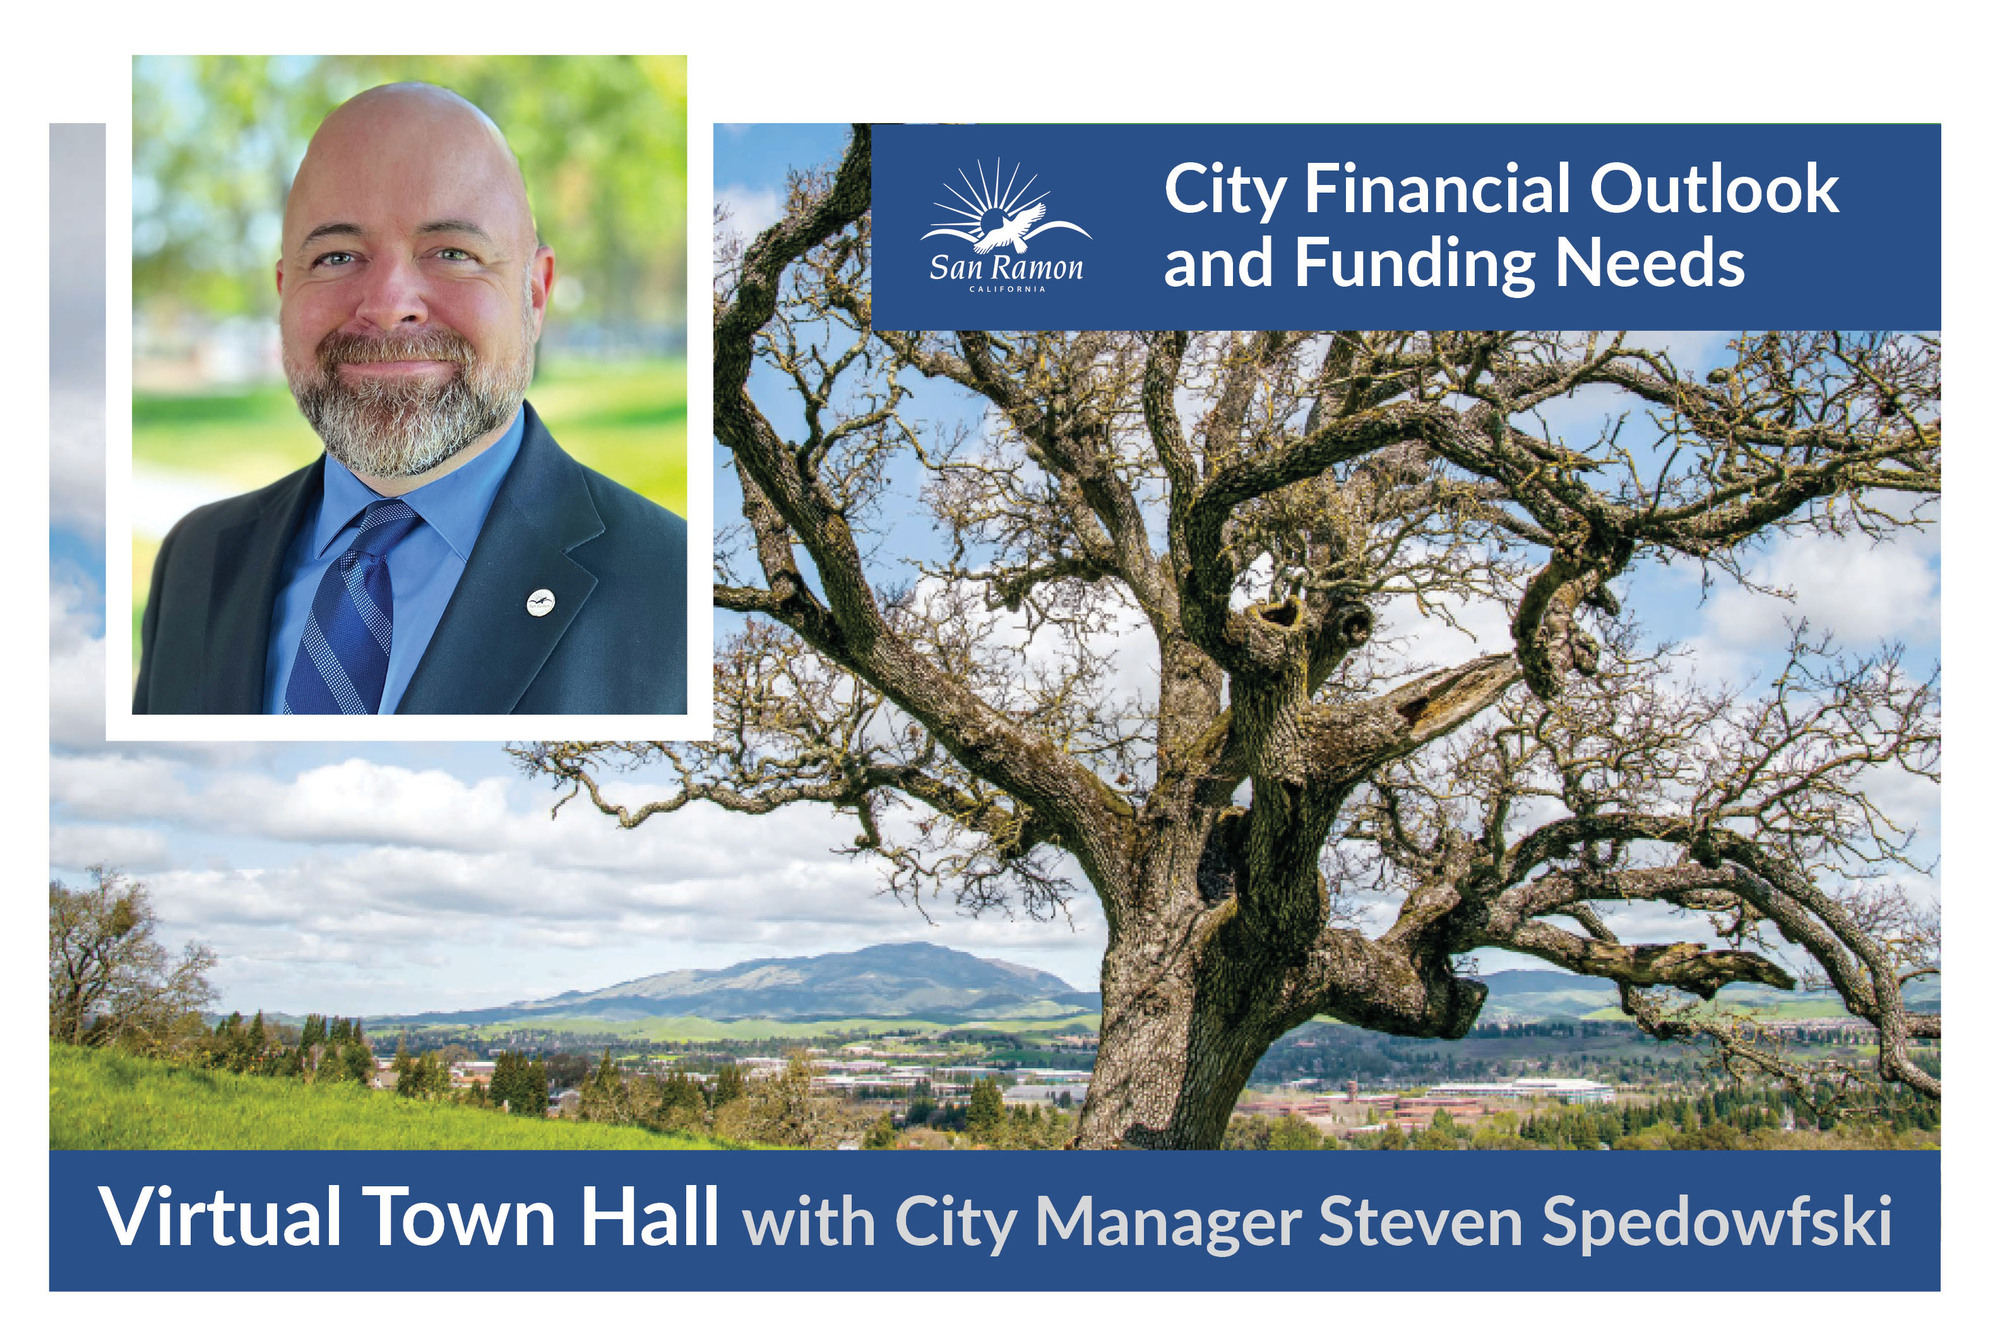 Virtual Town Hall on City Financial Outlook and Funding Needs